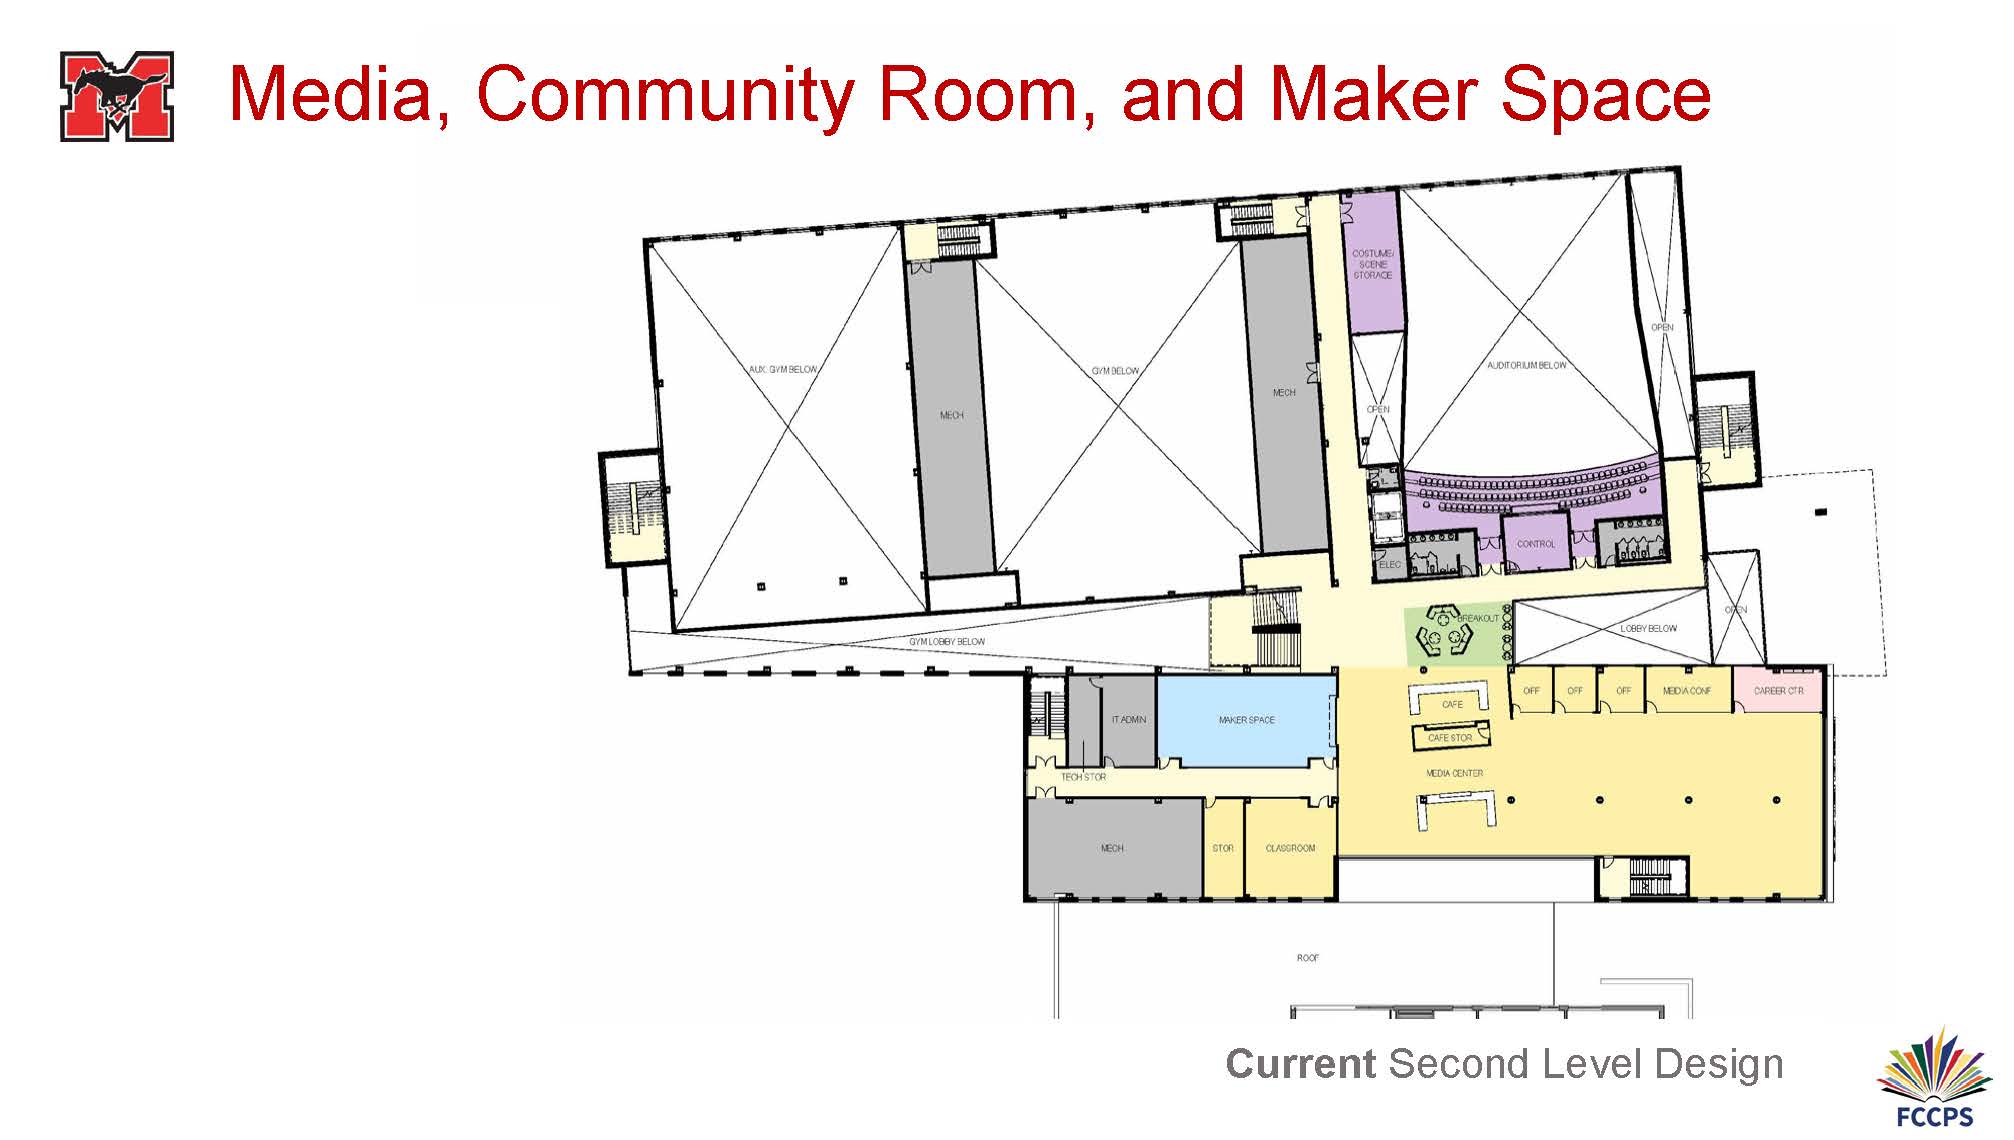 Media, Community Room, and Maker Space